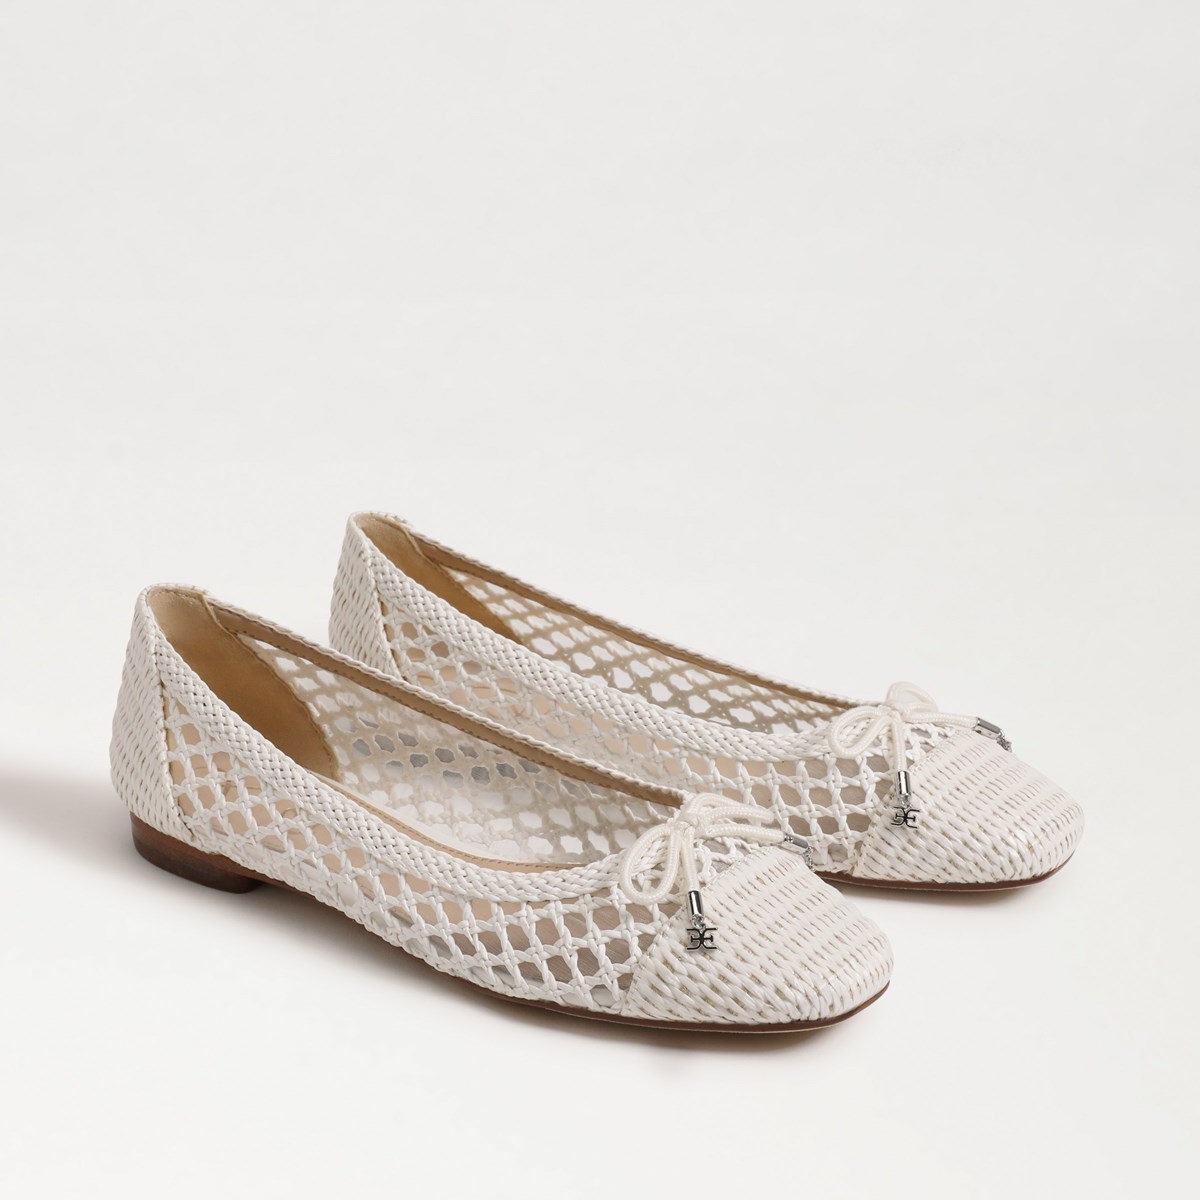 Sam Edelman May Ballet Flat | Women's Flats and Loafers